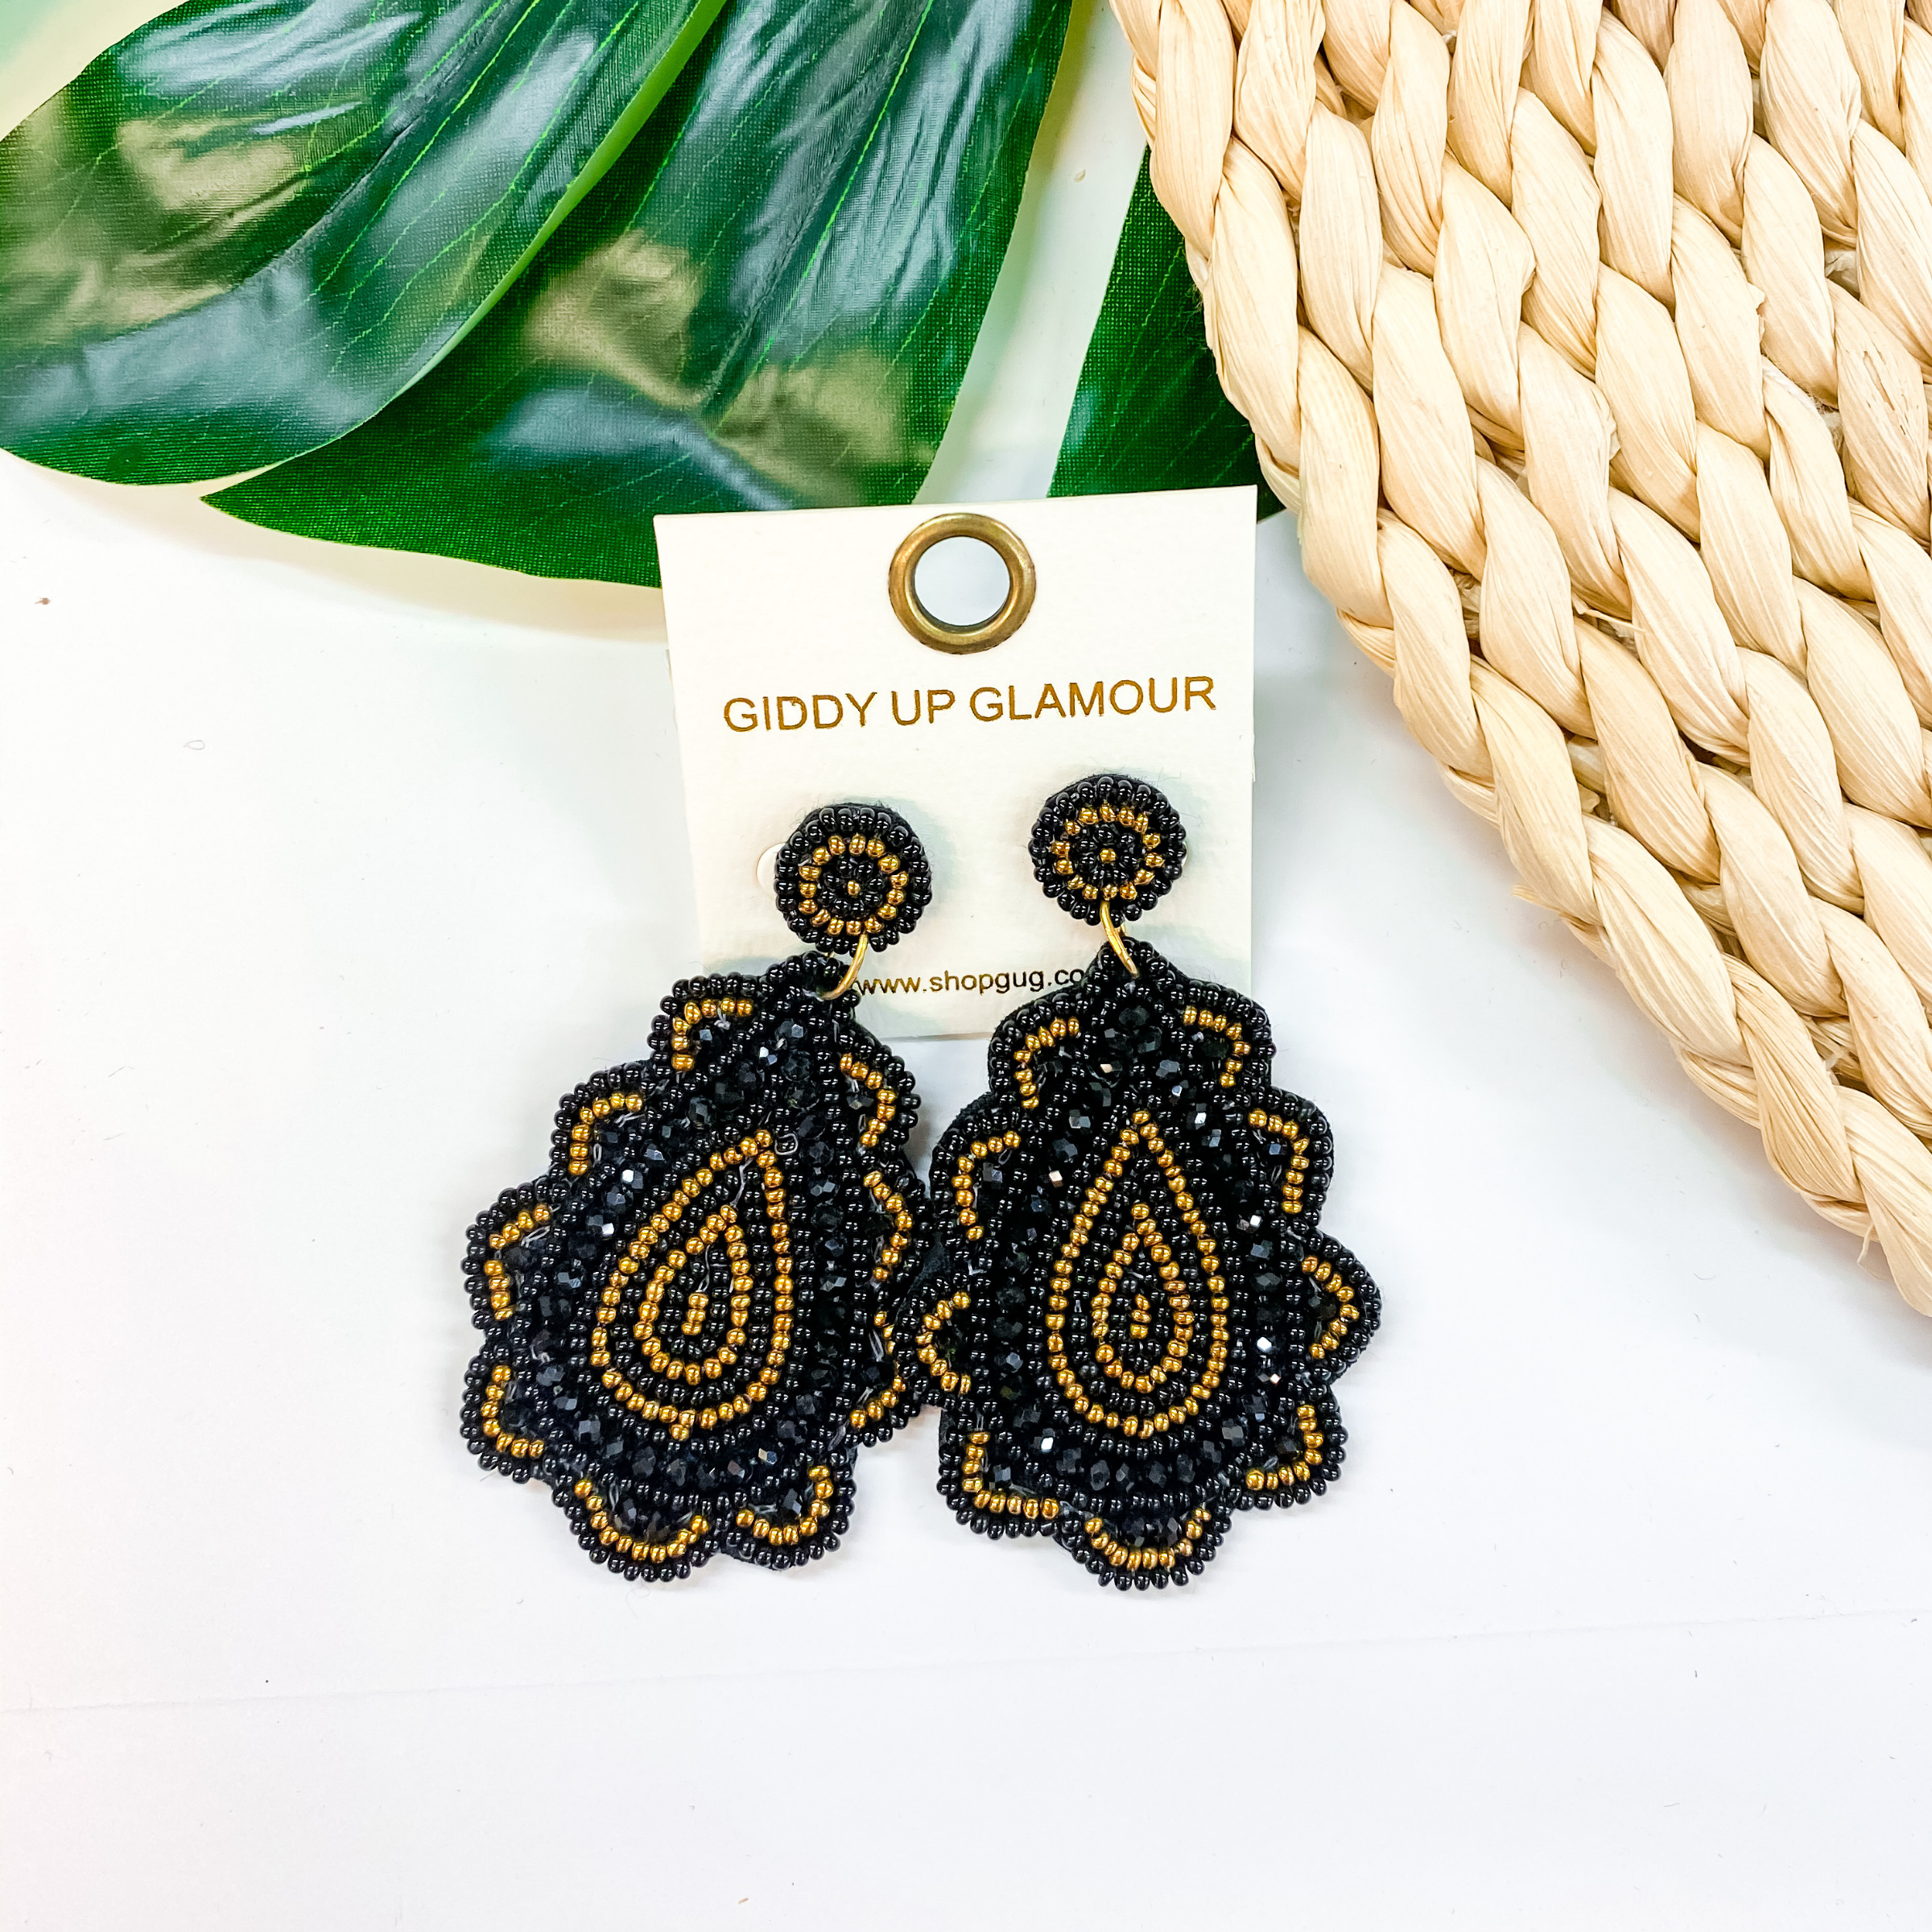 Light Up The Night Seed Bead Teardrop Earrings in Black - Giddy Up Glamour Boutique